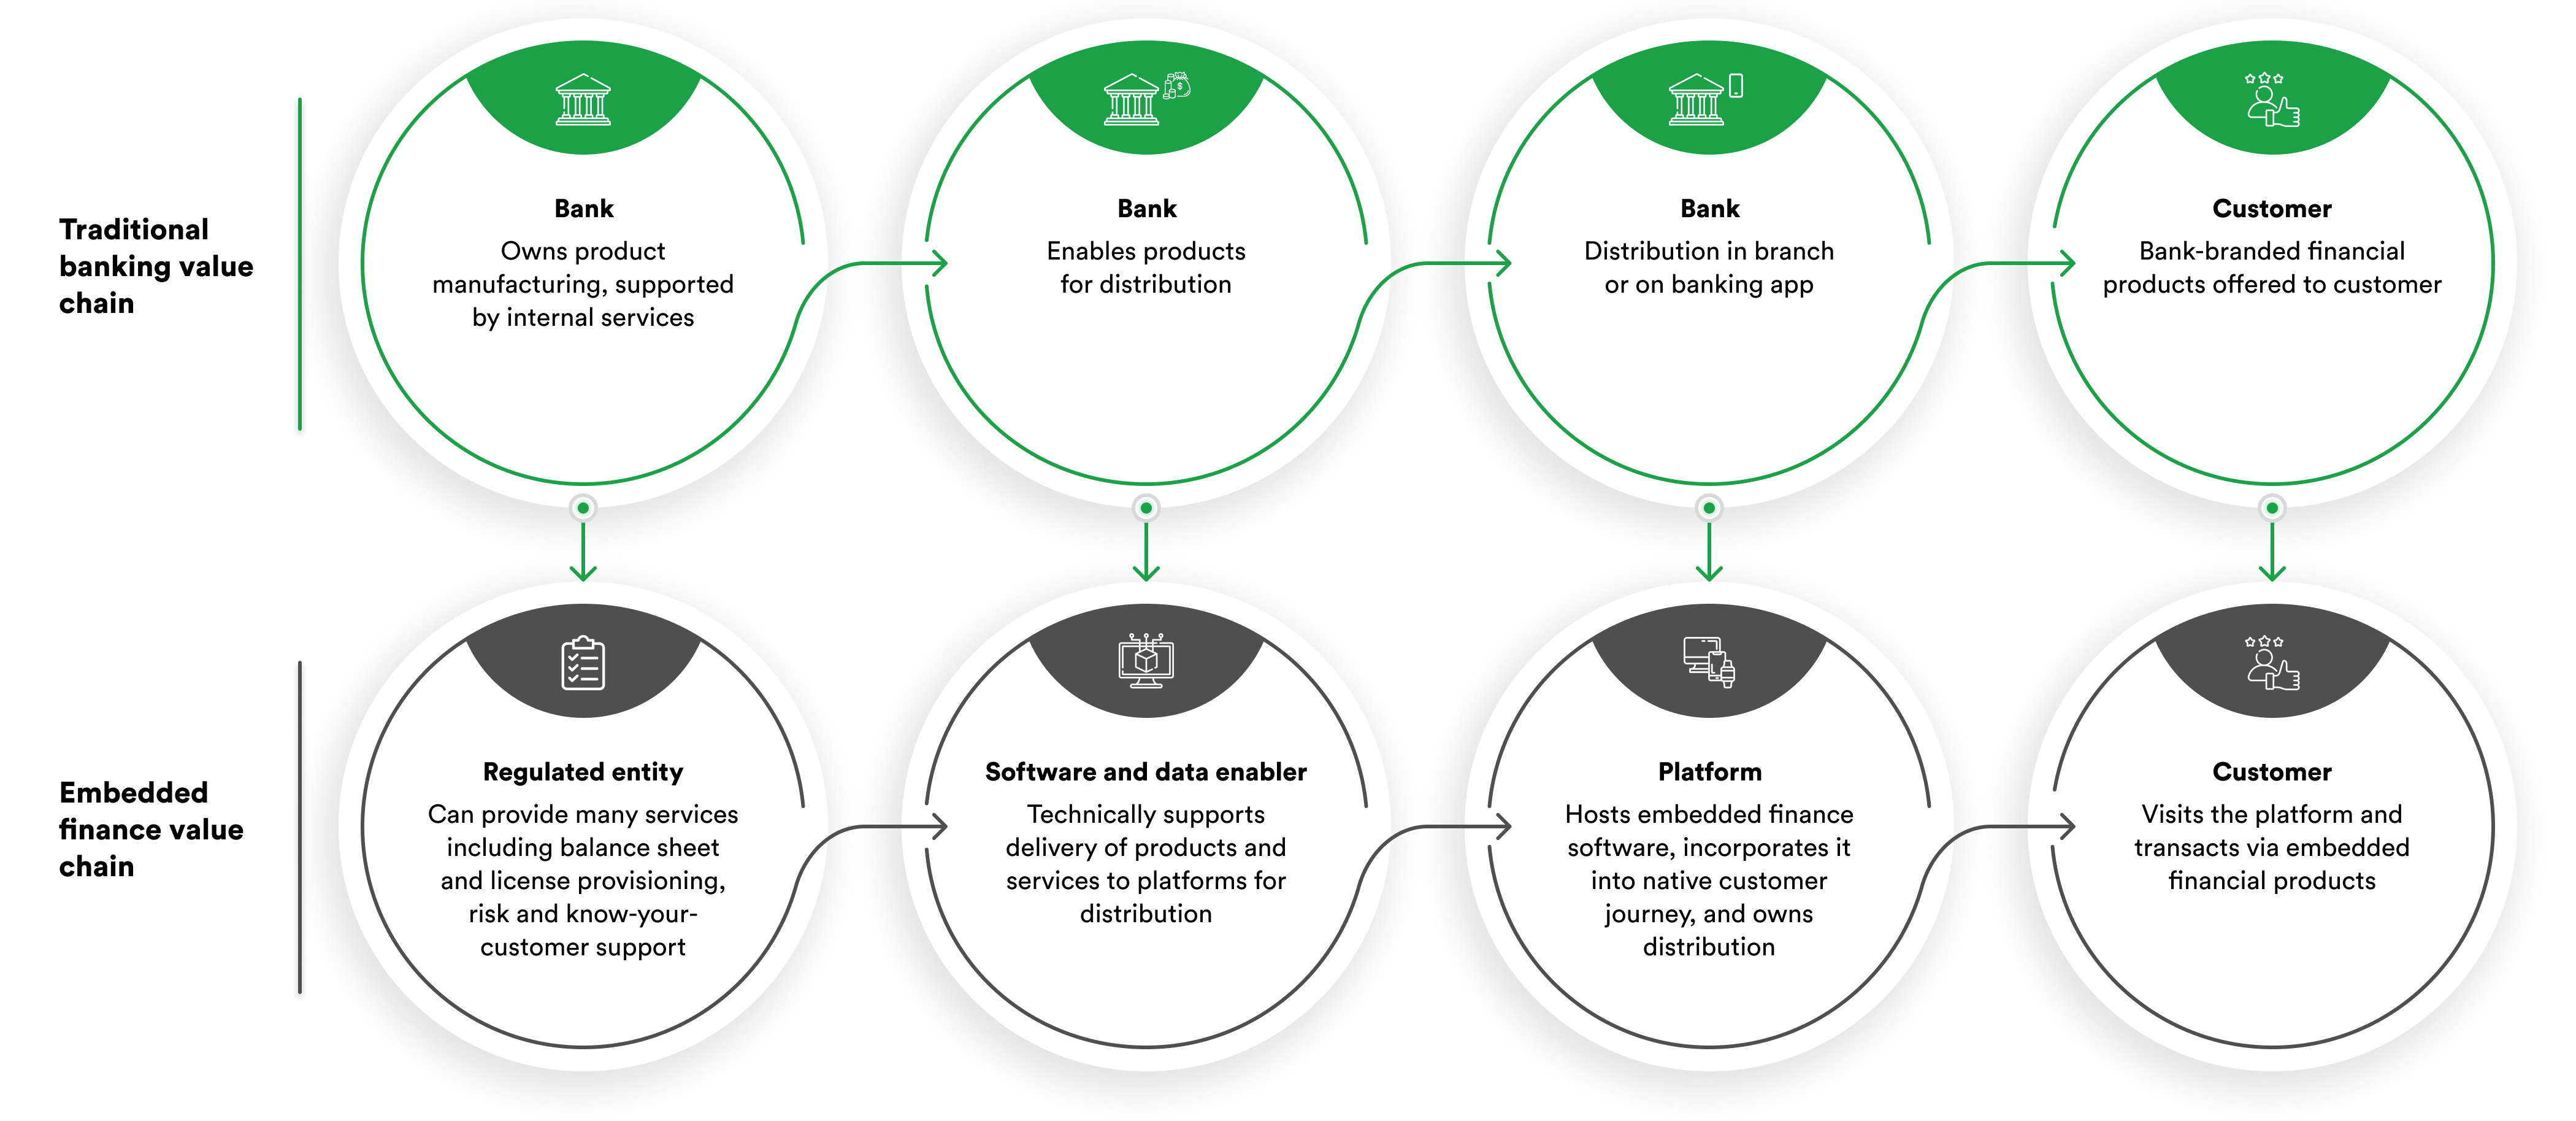 Traditional banking value chain versus embedded finance value chain